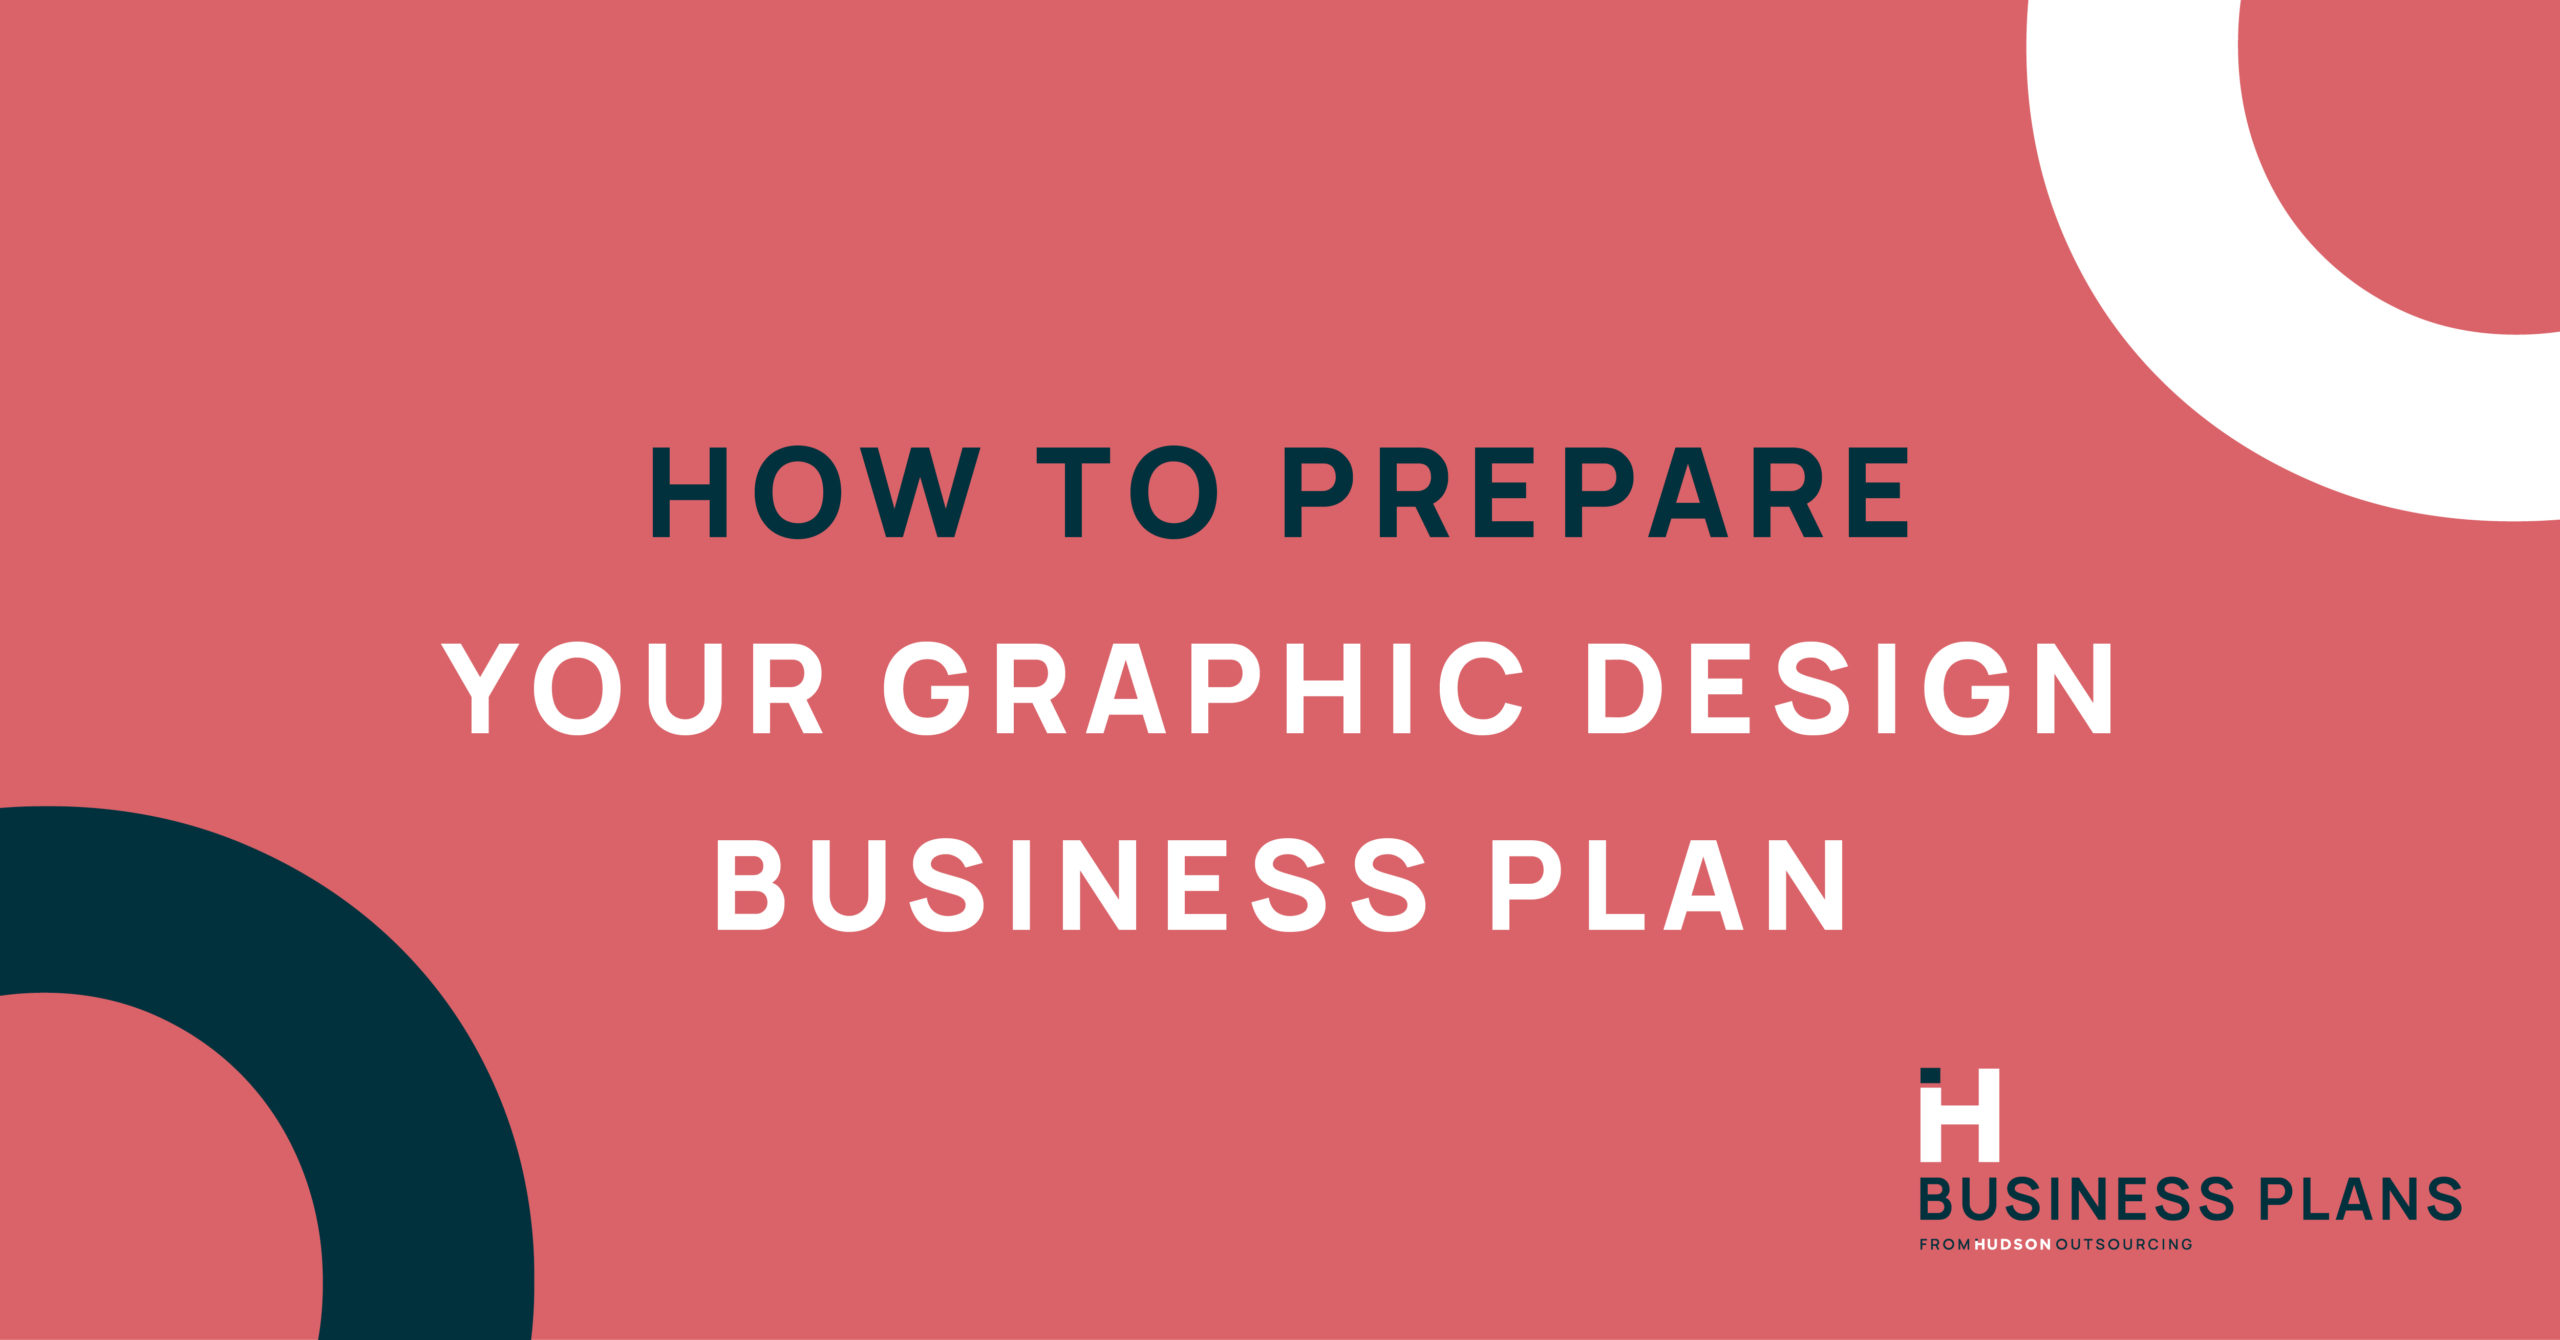 How to Prepare Your Graphic Design Business Plan